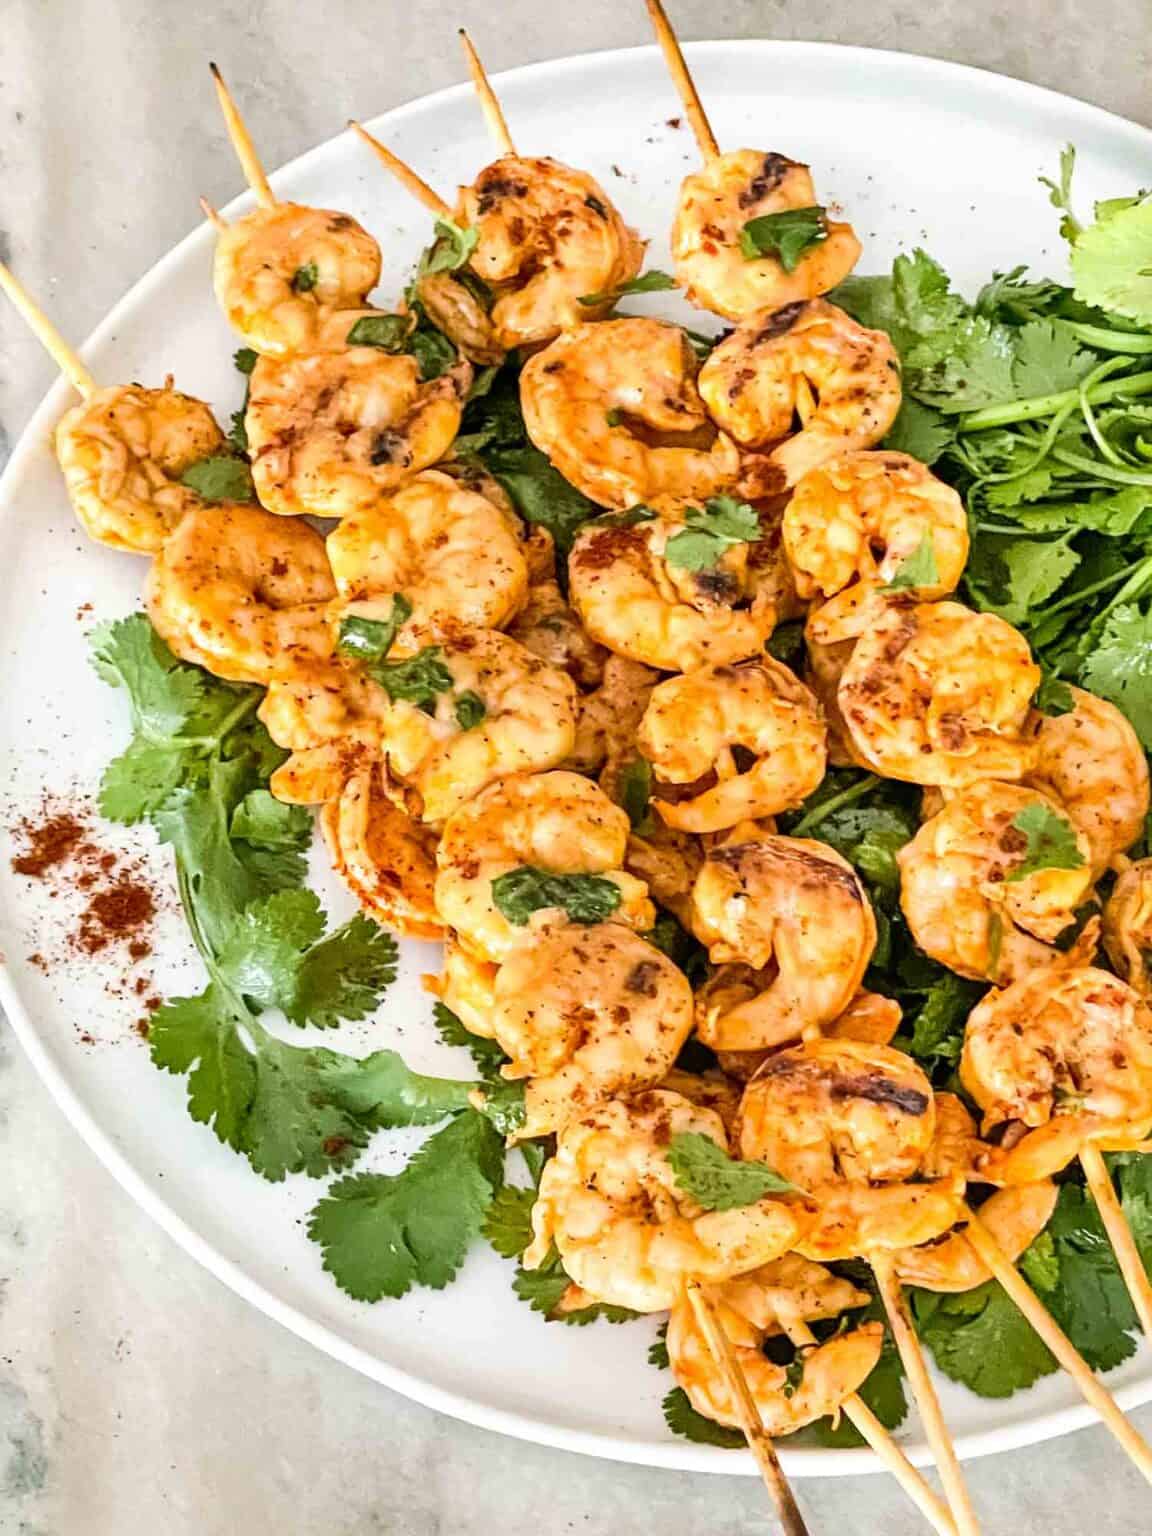 Mexican Grilled Shrimp skewers on cilantro on a white plate.
